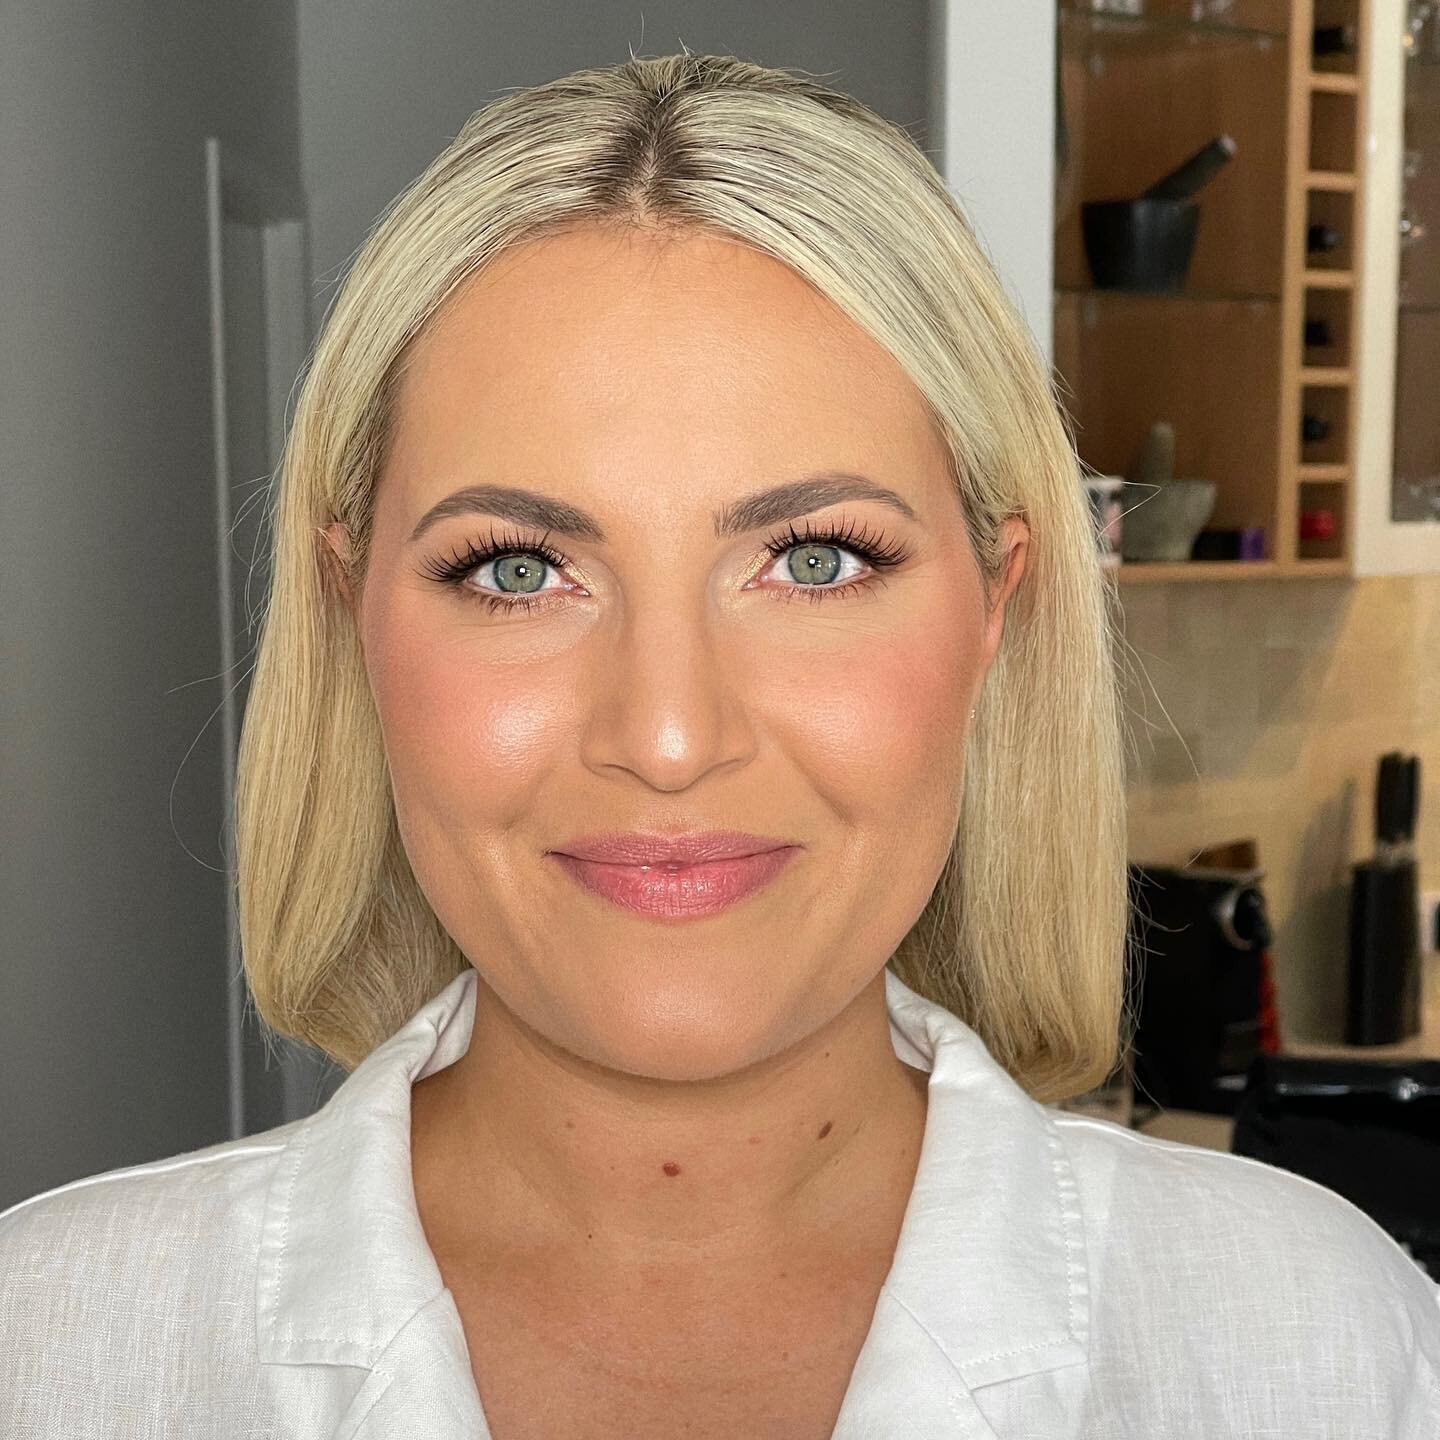 Real Bride, Loren // What a fabulous day yesterday with @jodycallanhair getting this gal and her beautiful bridesmaids ready for her big day. 

Loren opted for a glowy complexion, pink cheeks and a soft golden wash on her eyes. She looked incredible.